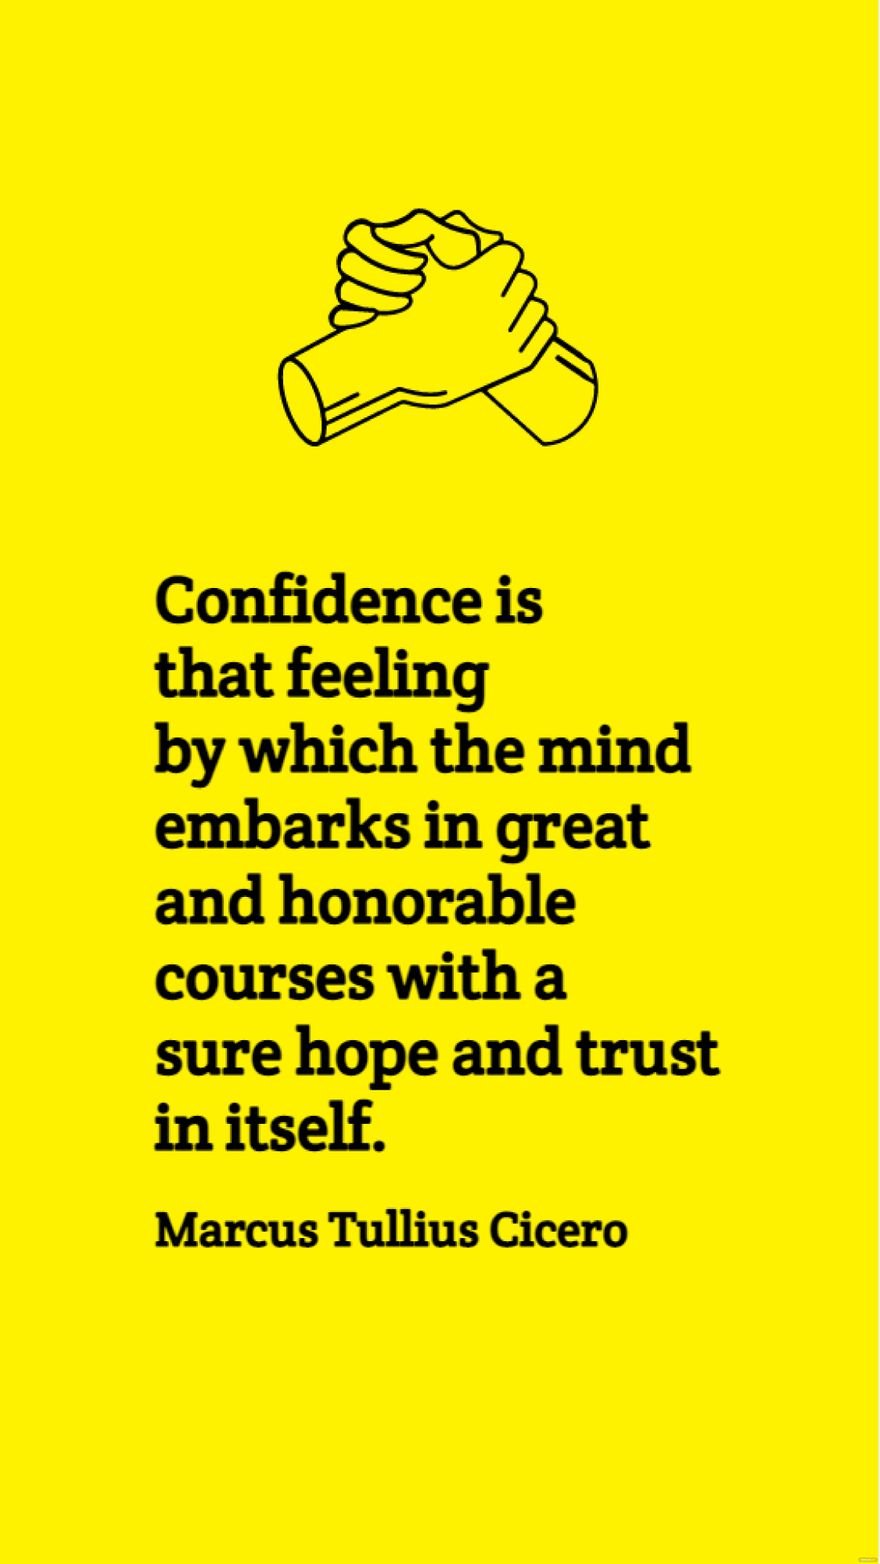 Marcus Tullius Cicero - Confidence is that feeling by which the mind embarks in great and honorable courses with a sure hope and trust in itself.